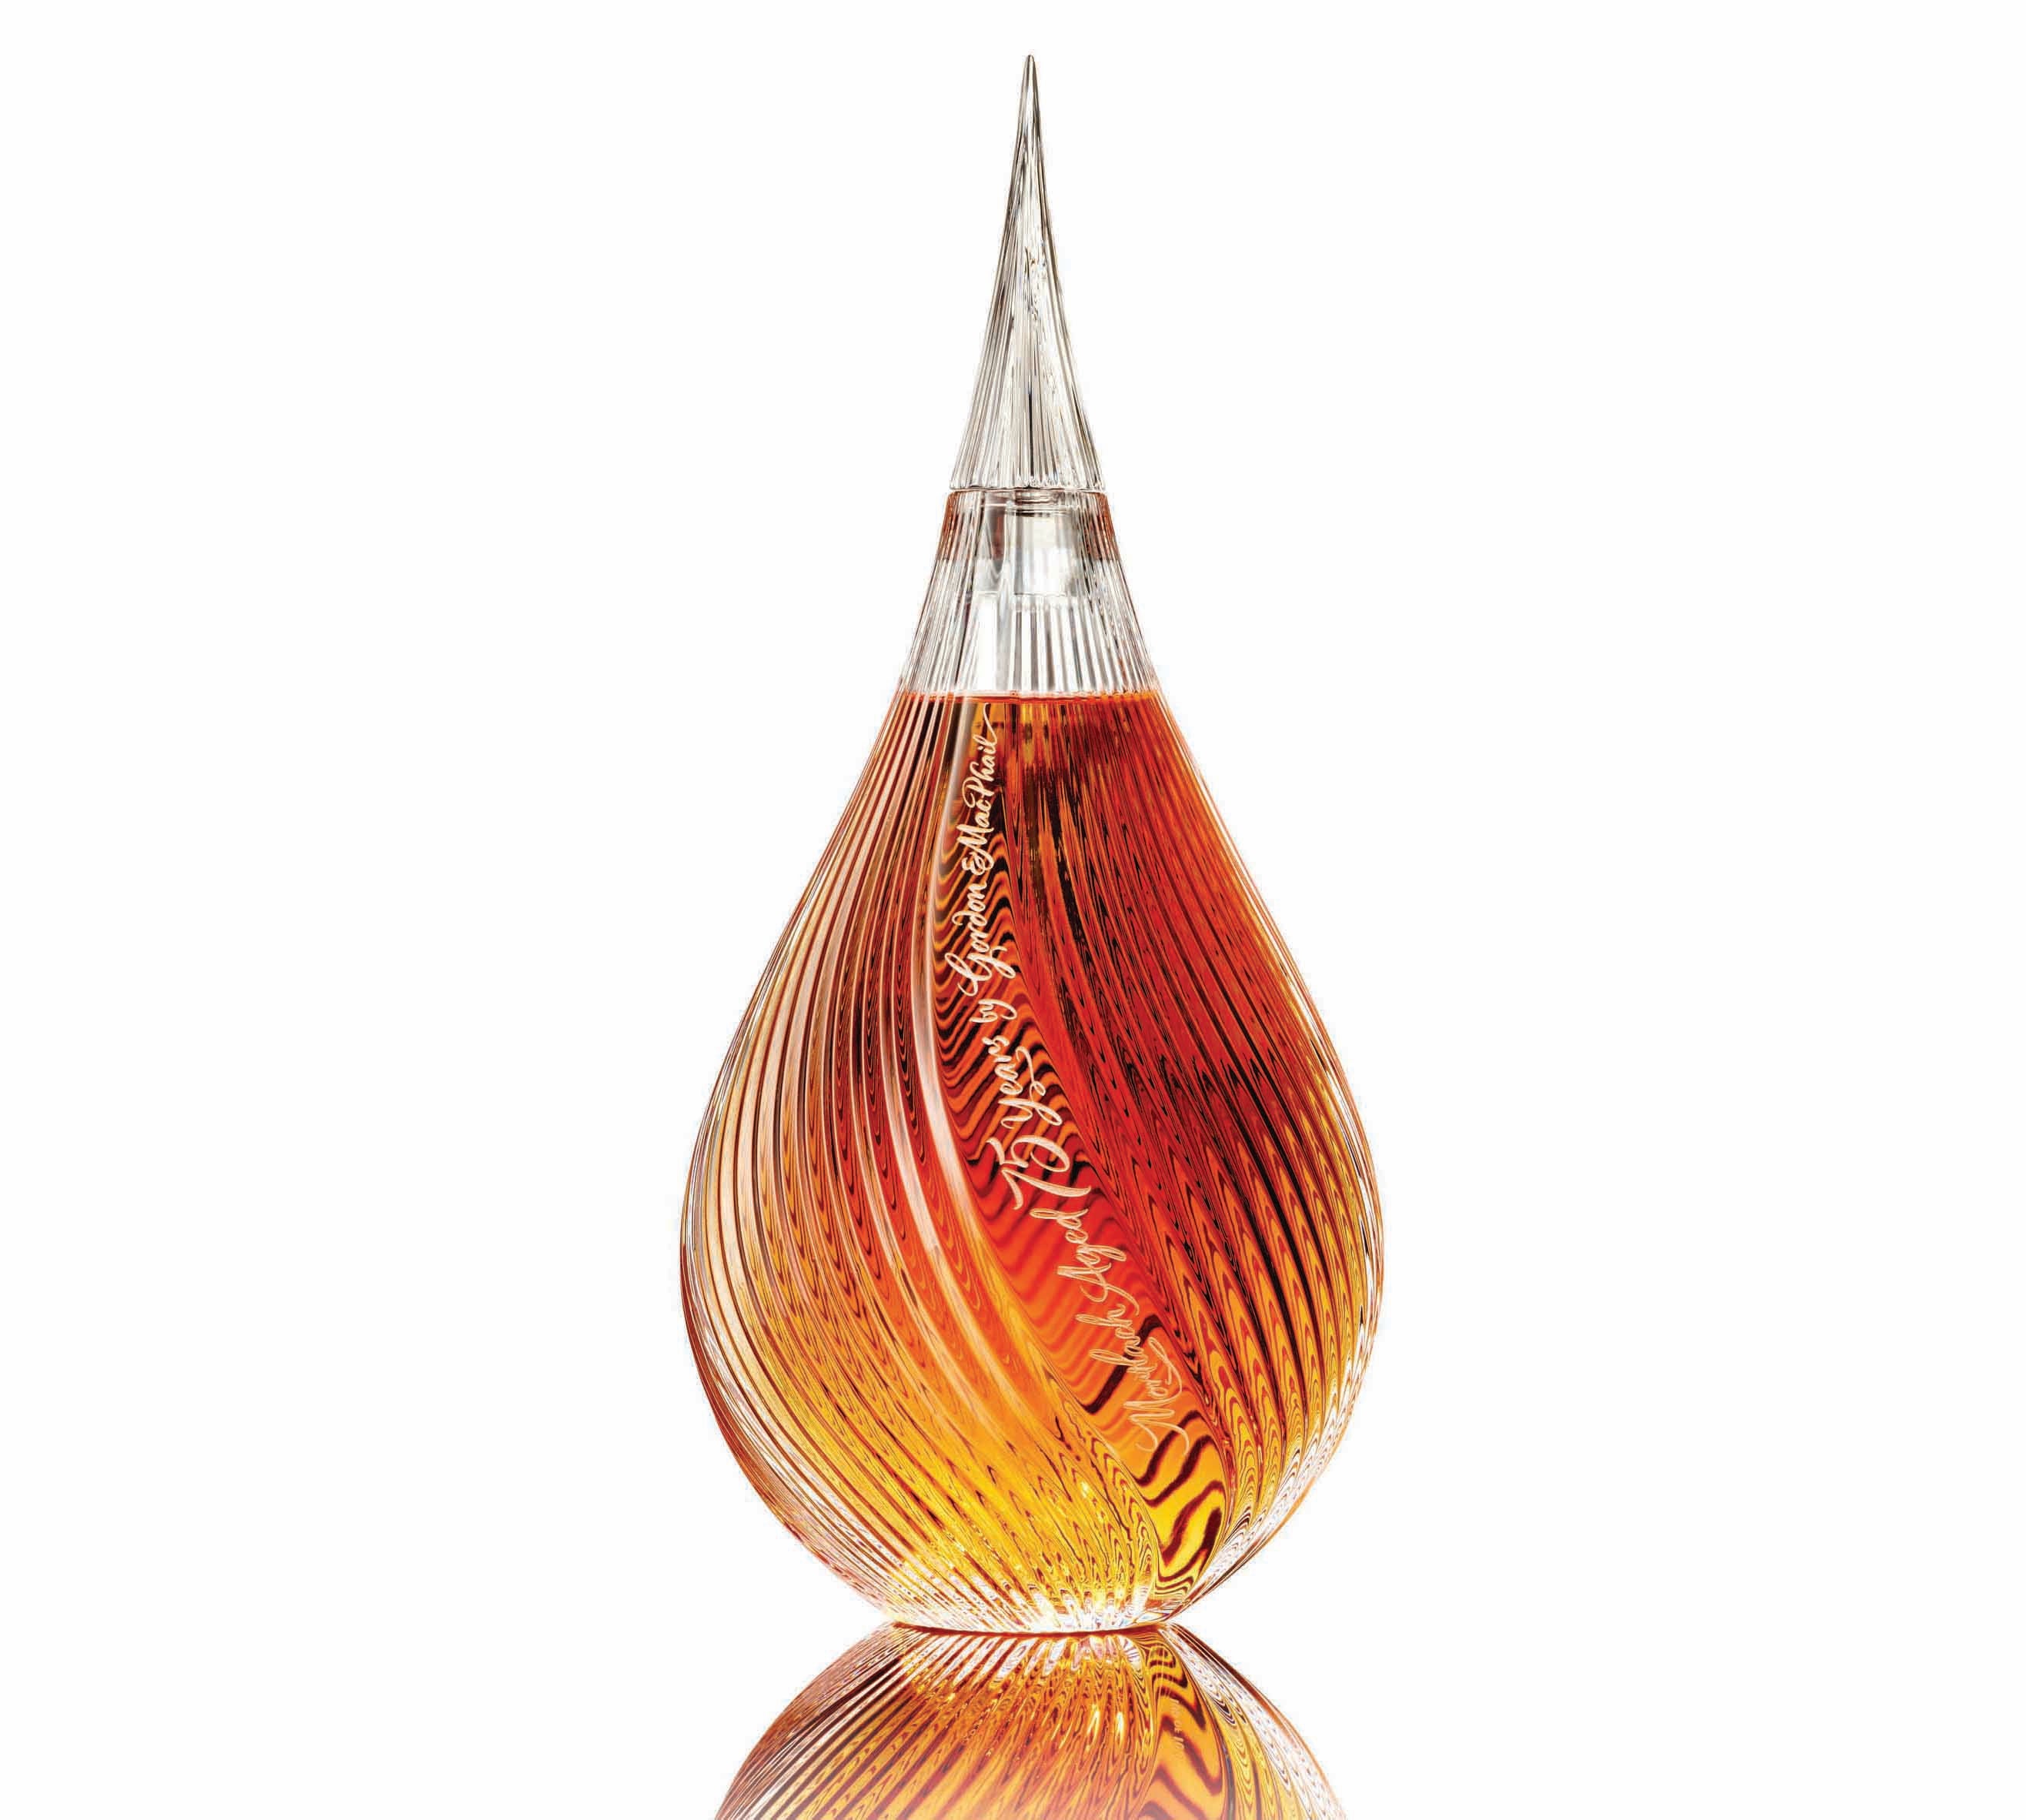 Mortlach 75 Year Old 1939 Generations